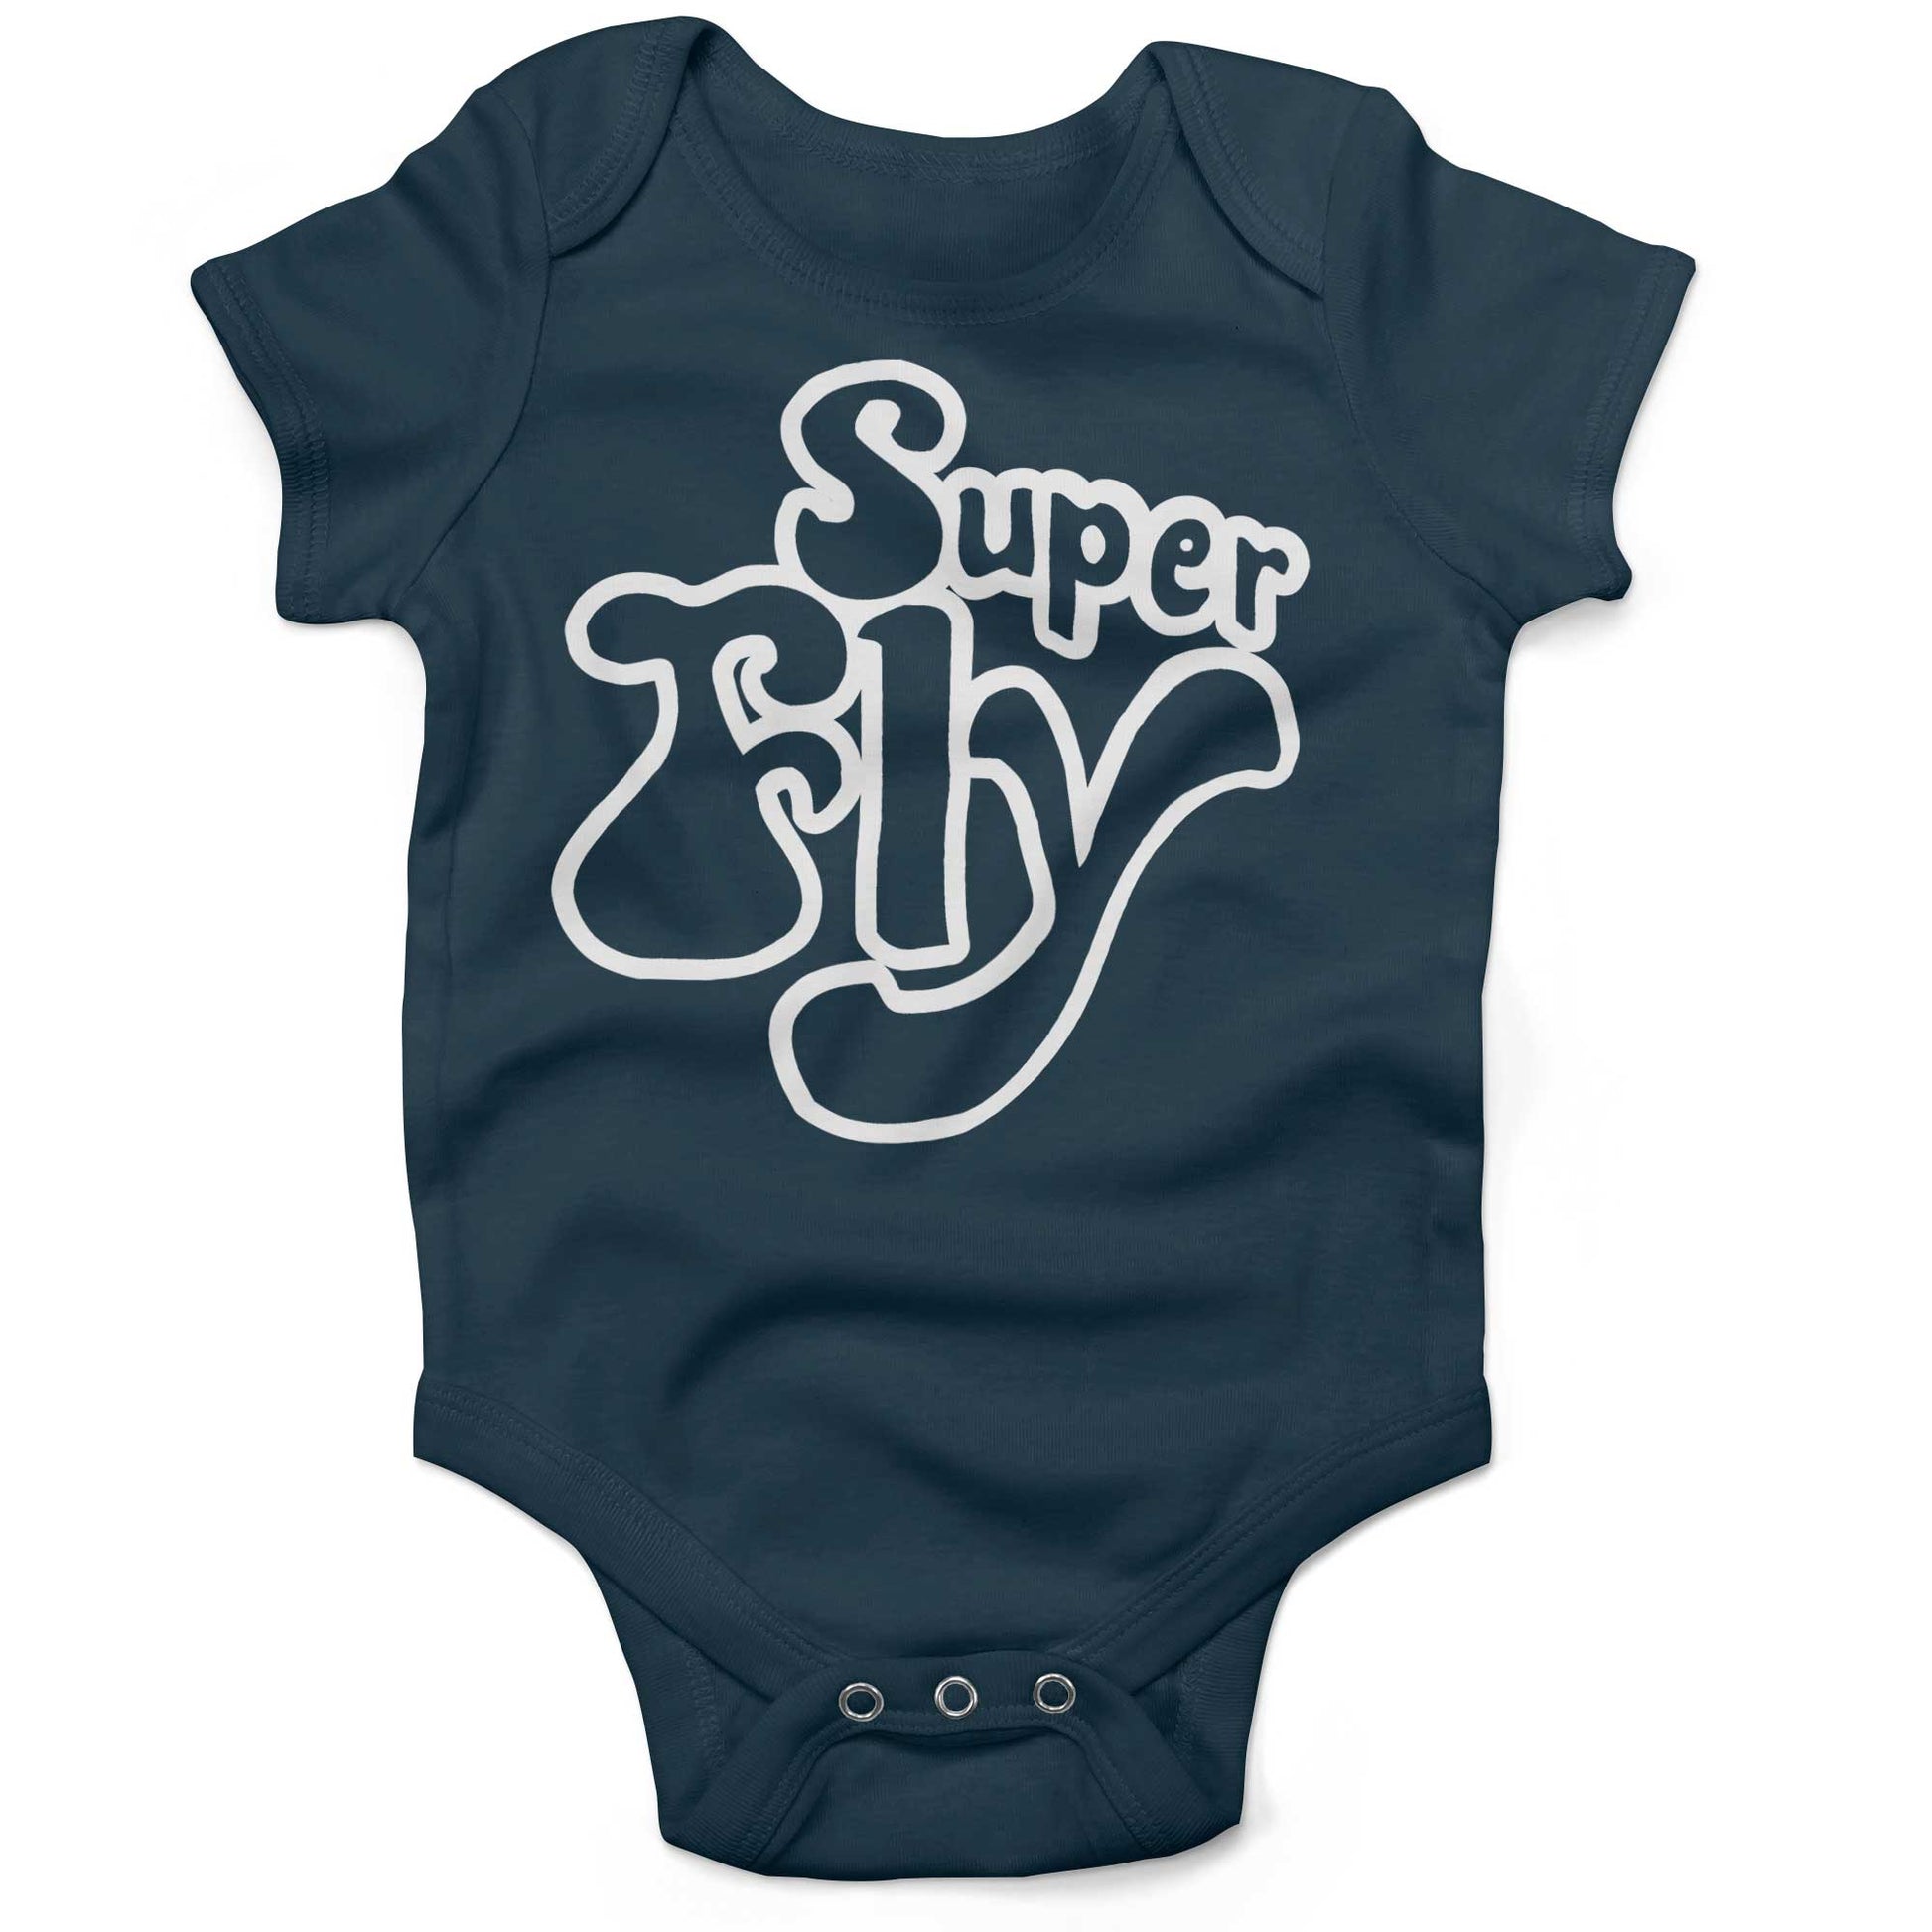 Superfly Infant Bodysuit or Raglan Baby Tee-Organic Pacific Blue-3-6 months